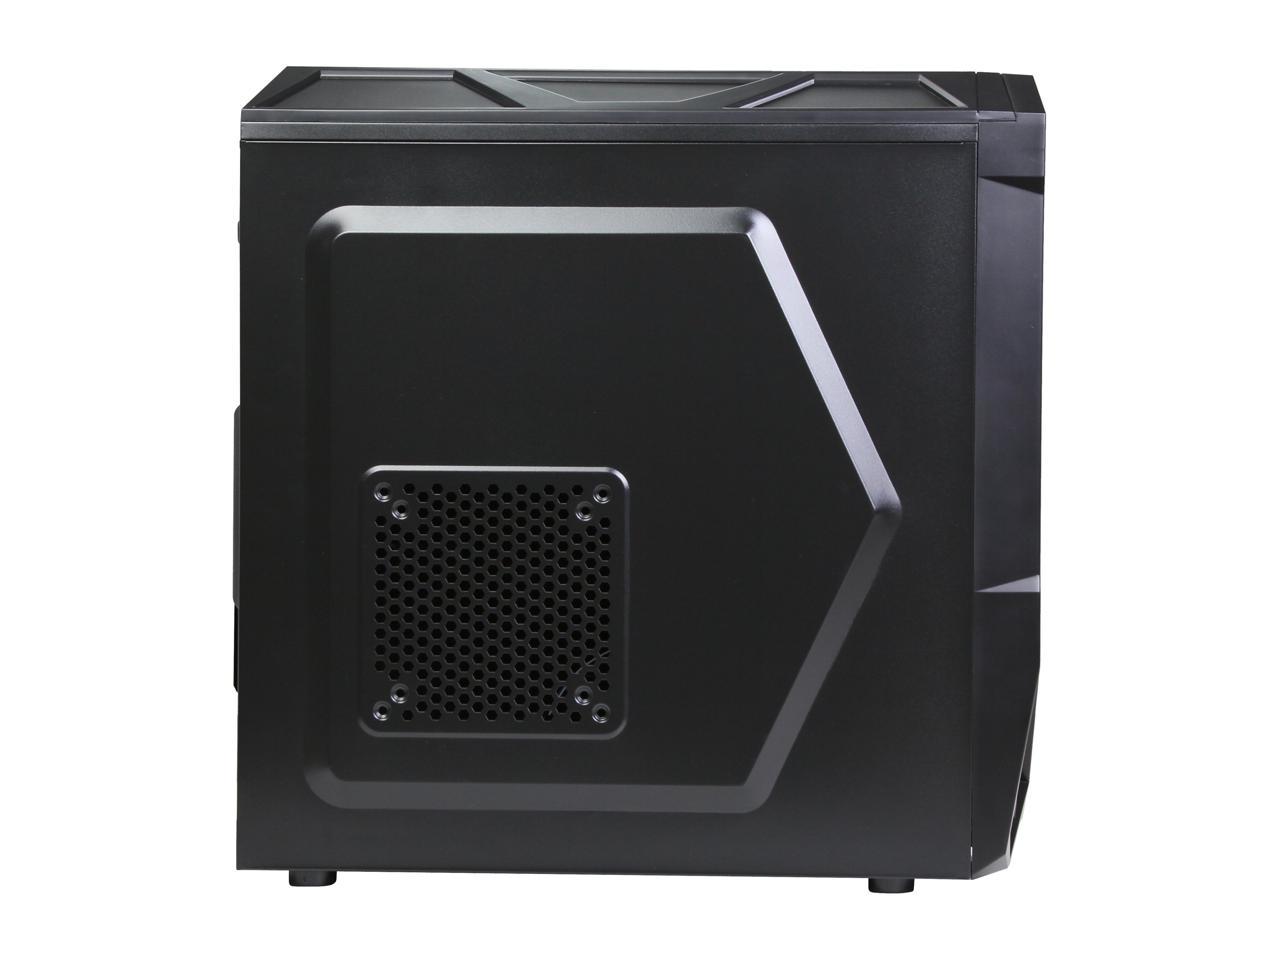 Rosewill - Black Gaming ATX Mid Tower Computer Case - Three Fans